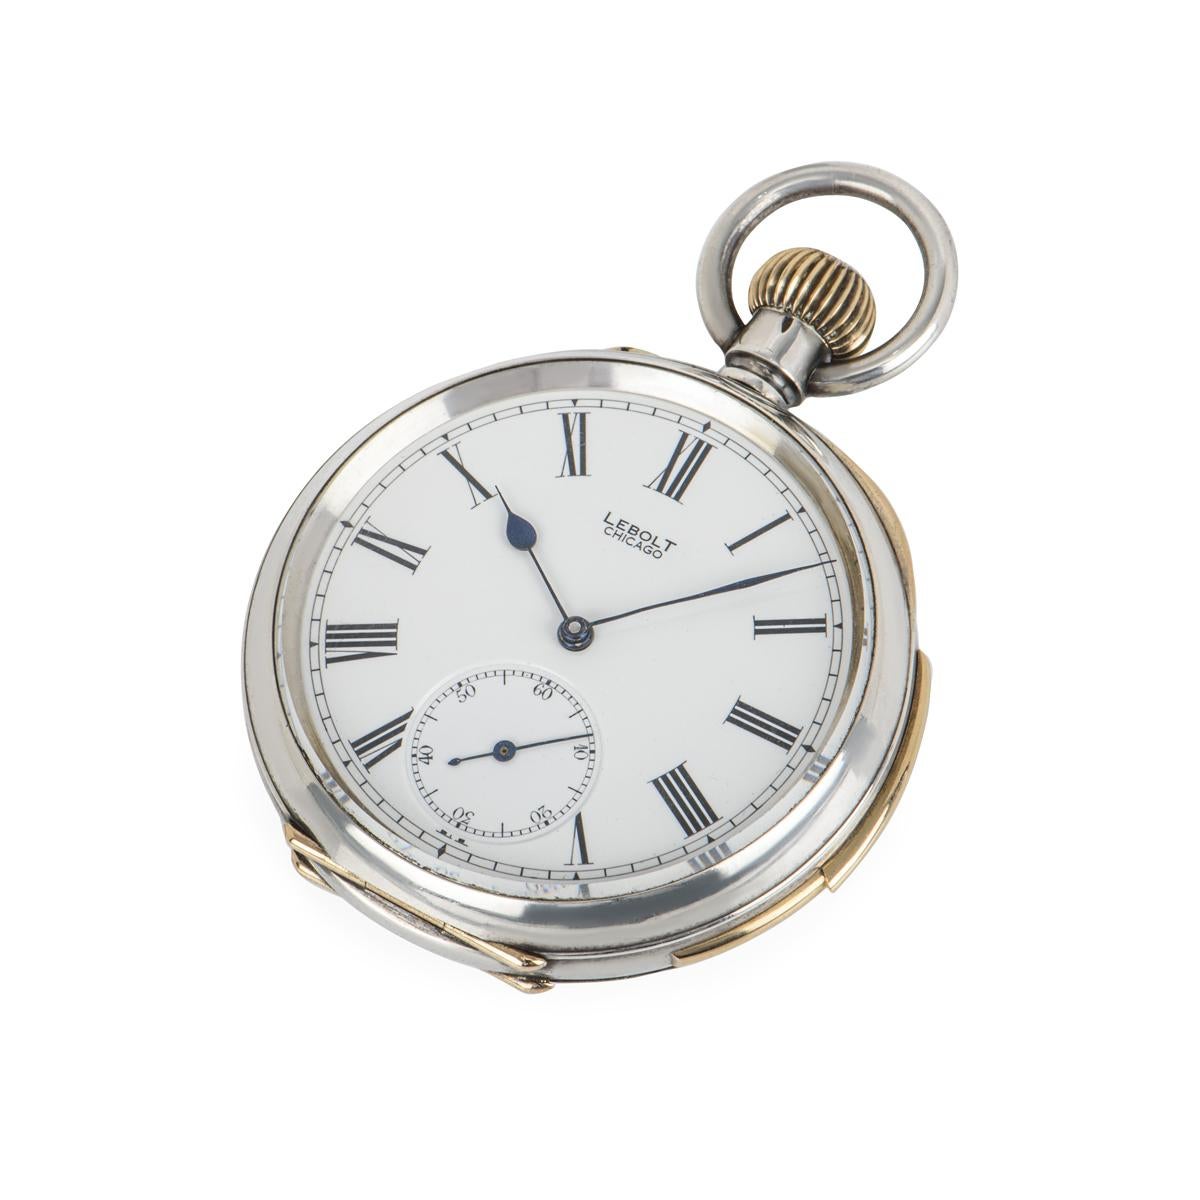 Stauffer & Co Silver Open Face Keyless Minute Repeater retailed by Lebolt Chicago 

Dial: The perfect white enamel roman numeral dial signed by the retailer Lebolt Chicago with sub-second dial and blued spade hands covered by a mineral glass.

Case: